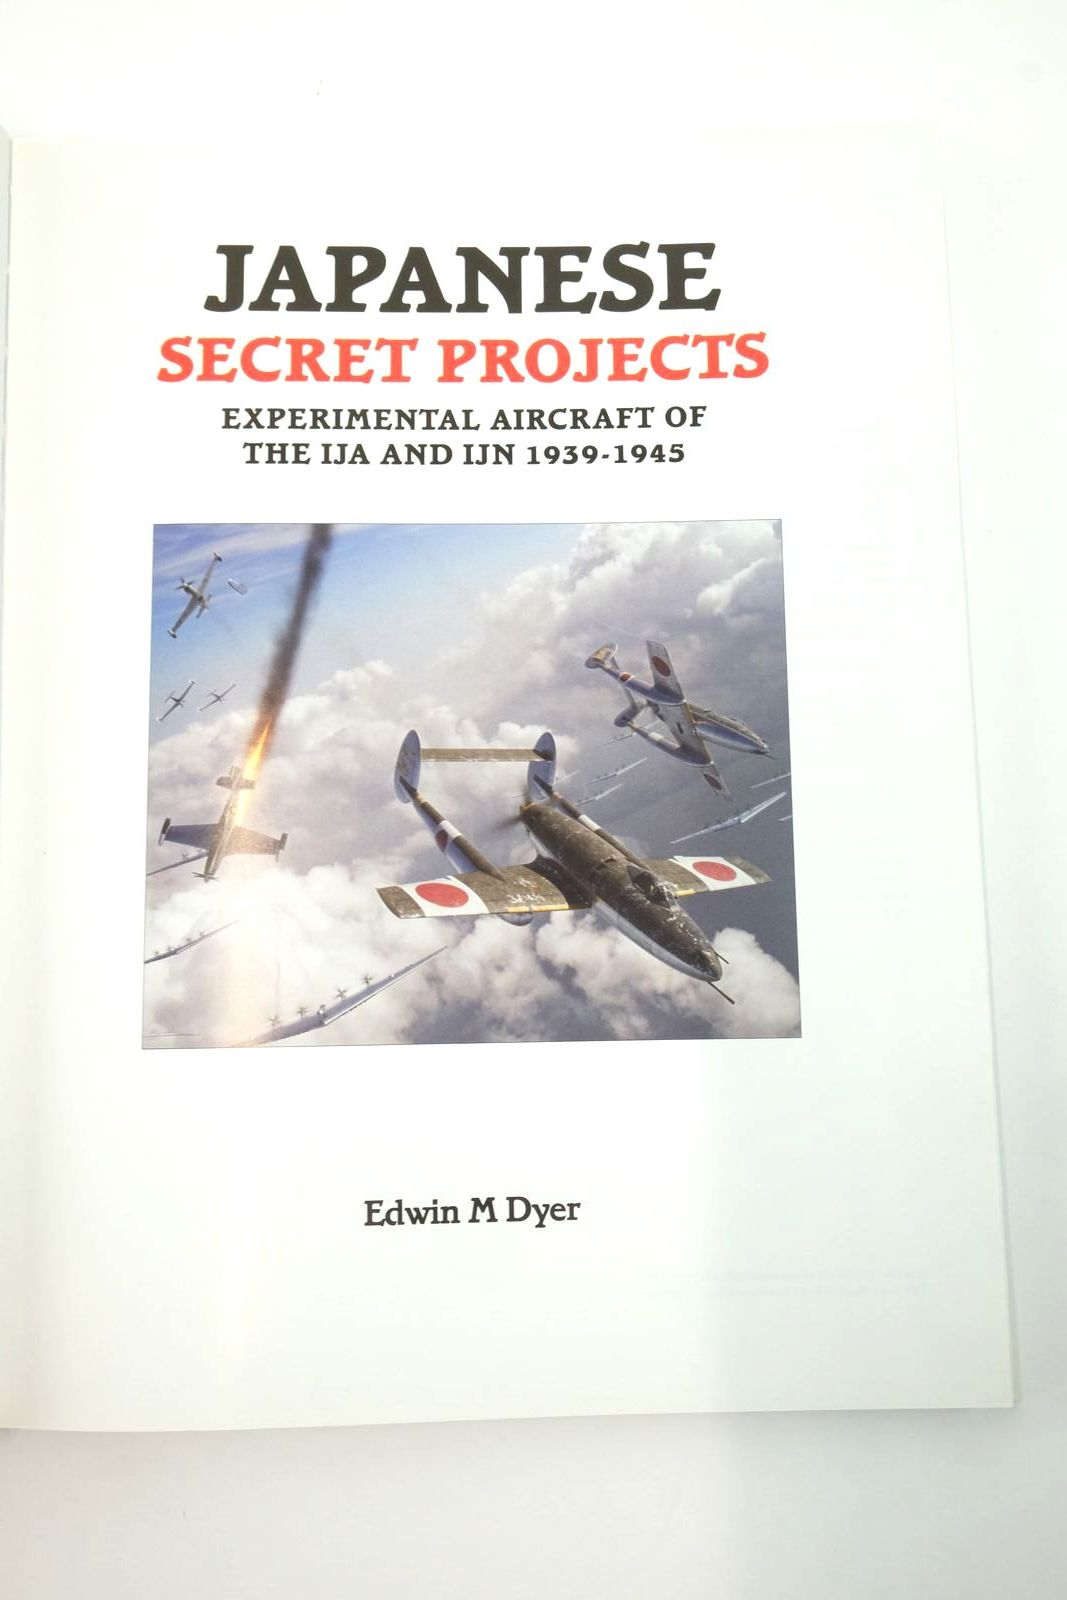 Photo of JAPANESE SECRET PROJECTS: EXPERIMENTAL AIRCRAFT OF THE IJA AND IJN 1939-1945 written by Dyer, Edwin M. published by Midland Publishing (STOCK CODE: 2138503)  for sale by Stella & Rose's Books